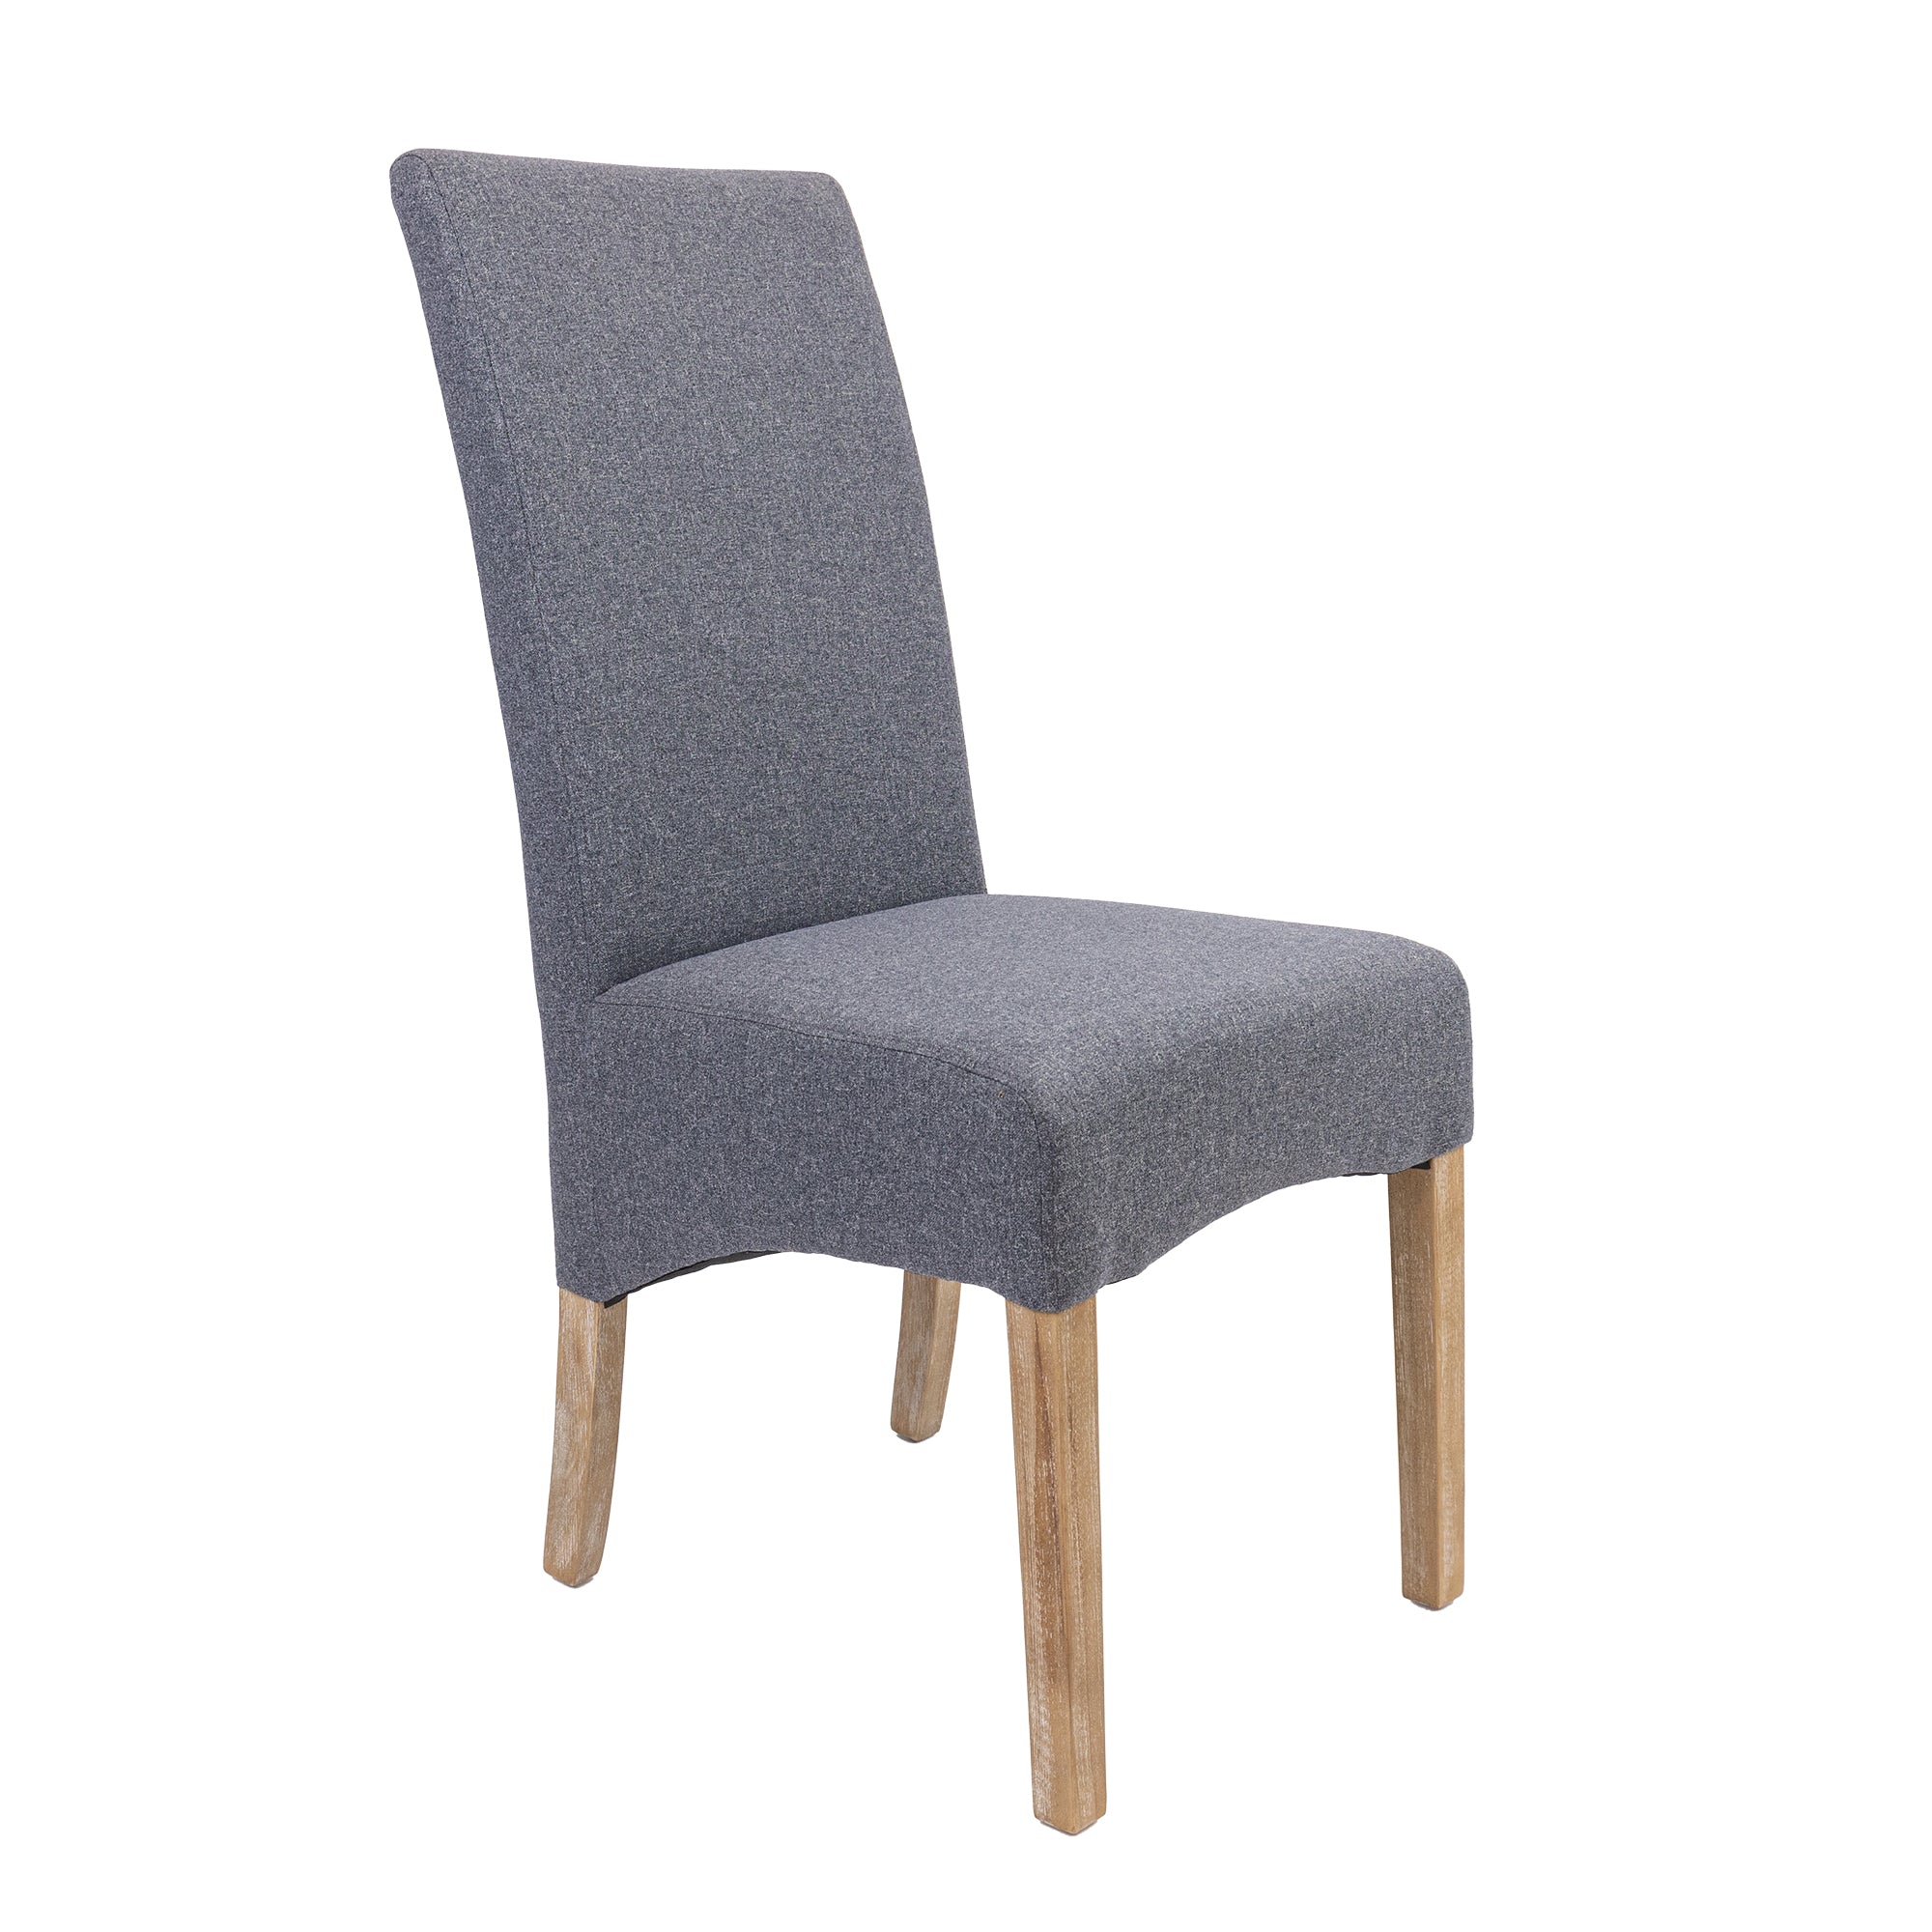 Contemporary Grey Upholstered Dining Chairs, Set of 4 - Pine Frame